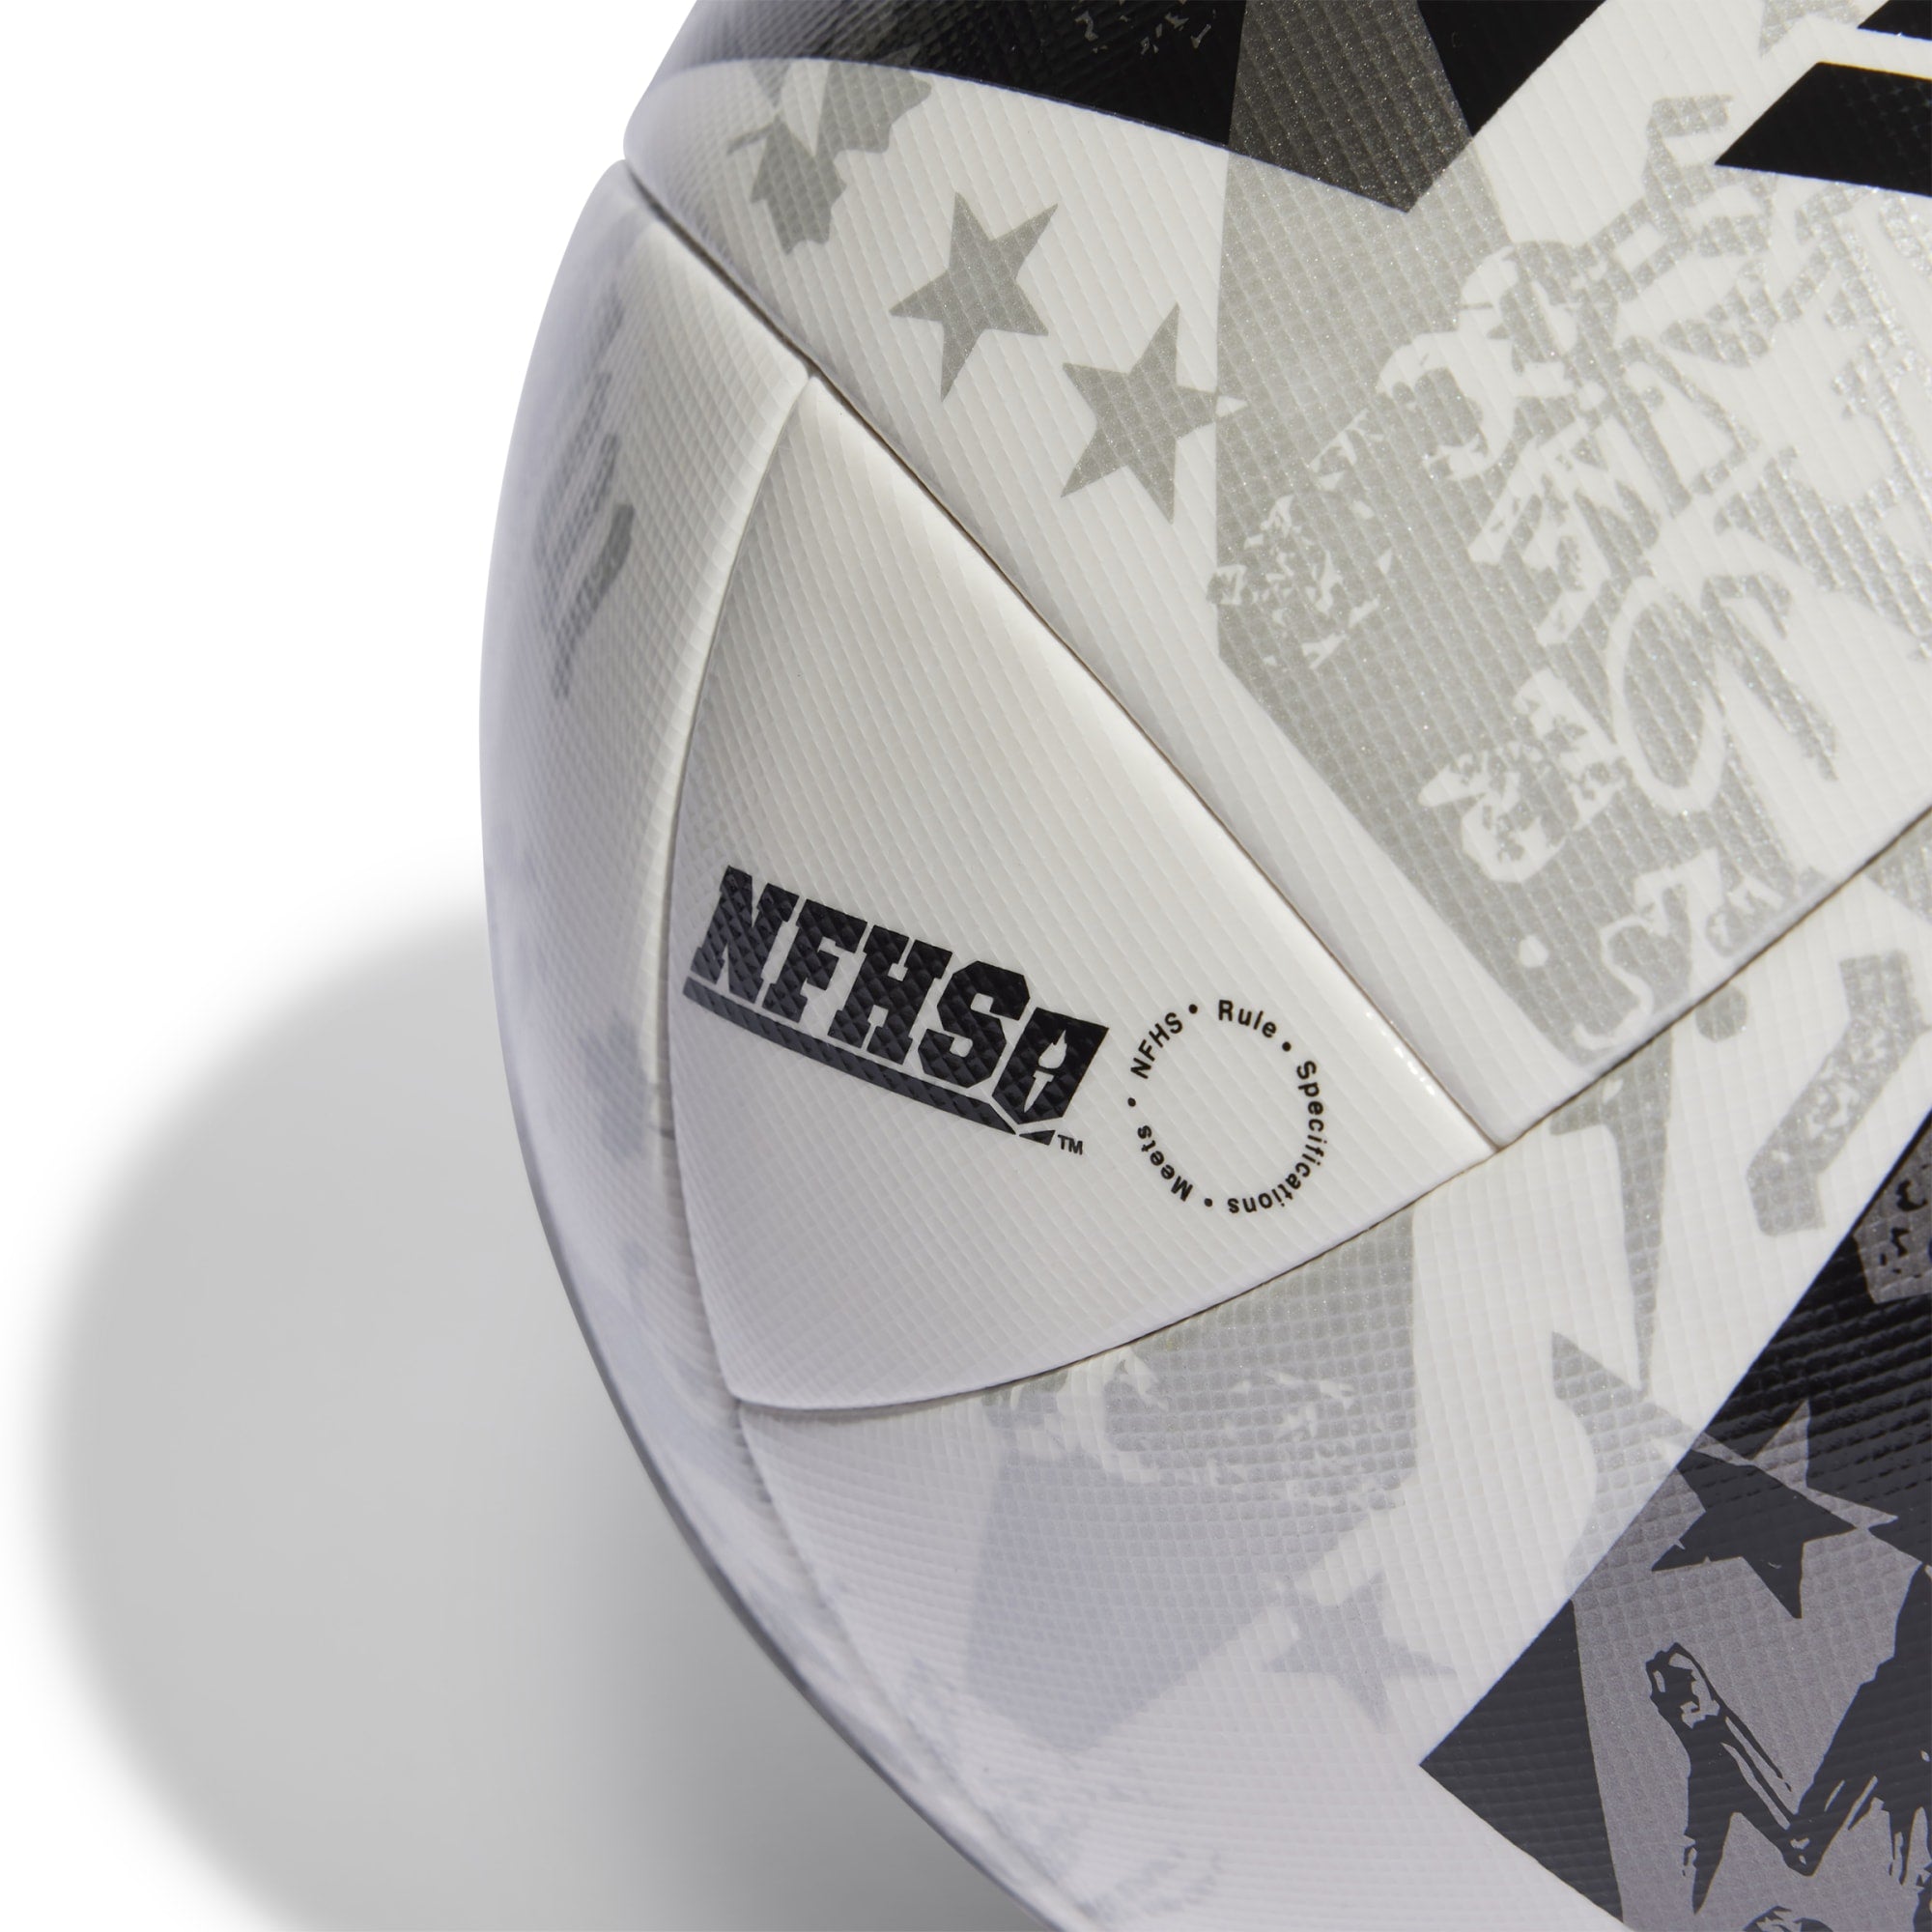 Adidas MLS Competition NFHS Ball - HT9029